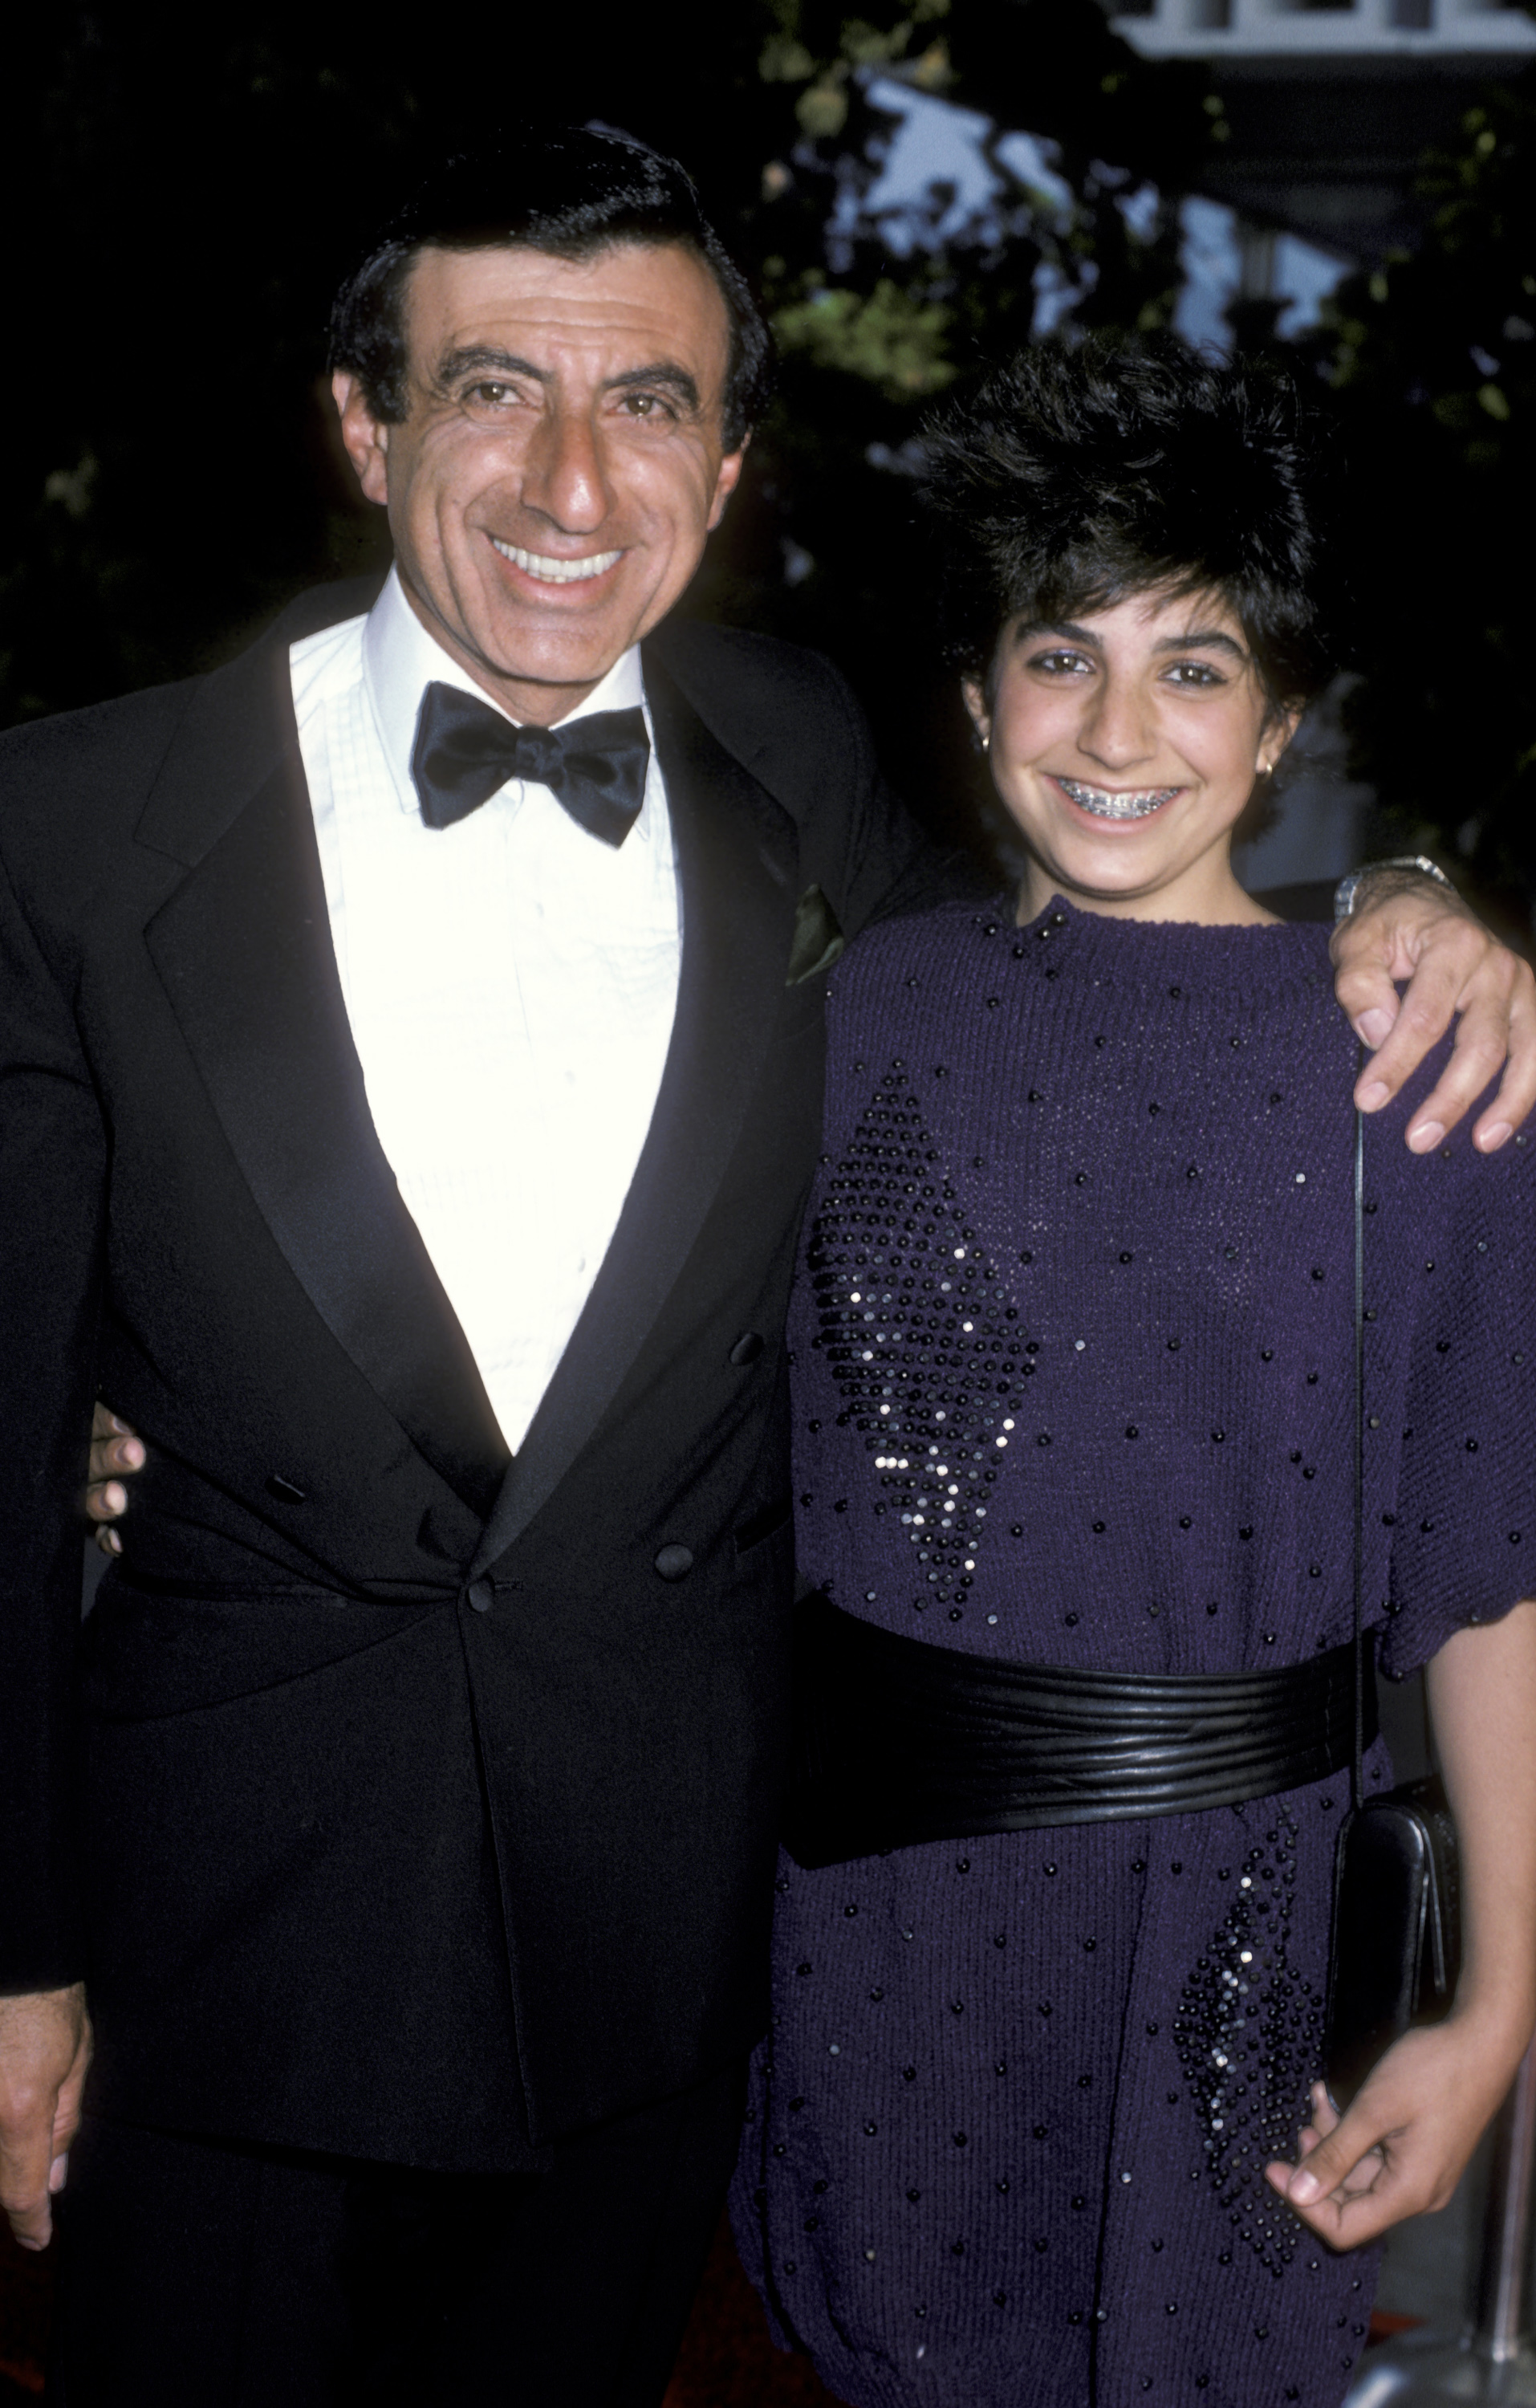 Jamie Farr and his daughter Yvonne Farr attend the 10th Annual People's Choice Awards at the Santa Monica Civic Auditorium on March 15, 1984 in Santa Monica, California | Source: Getty Images